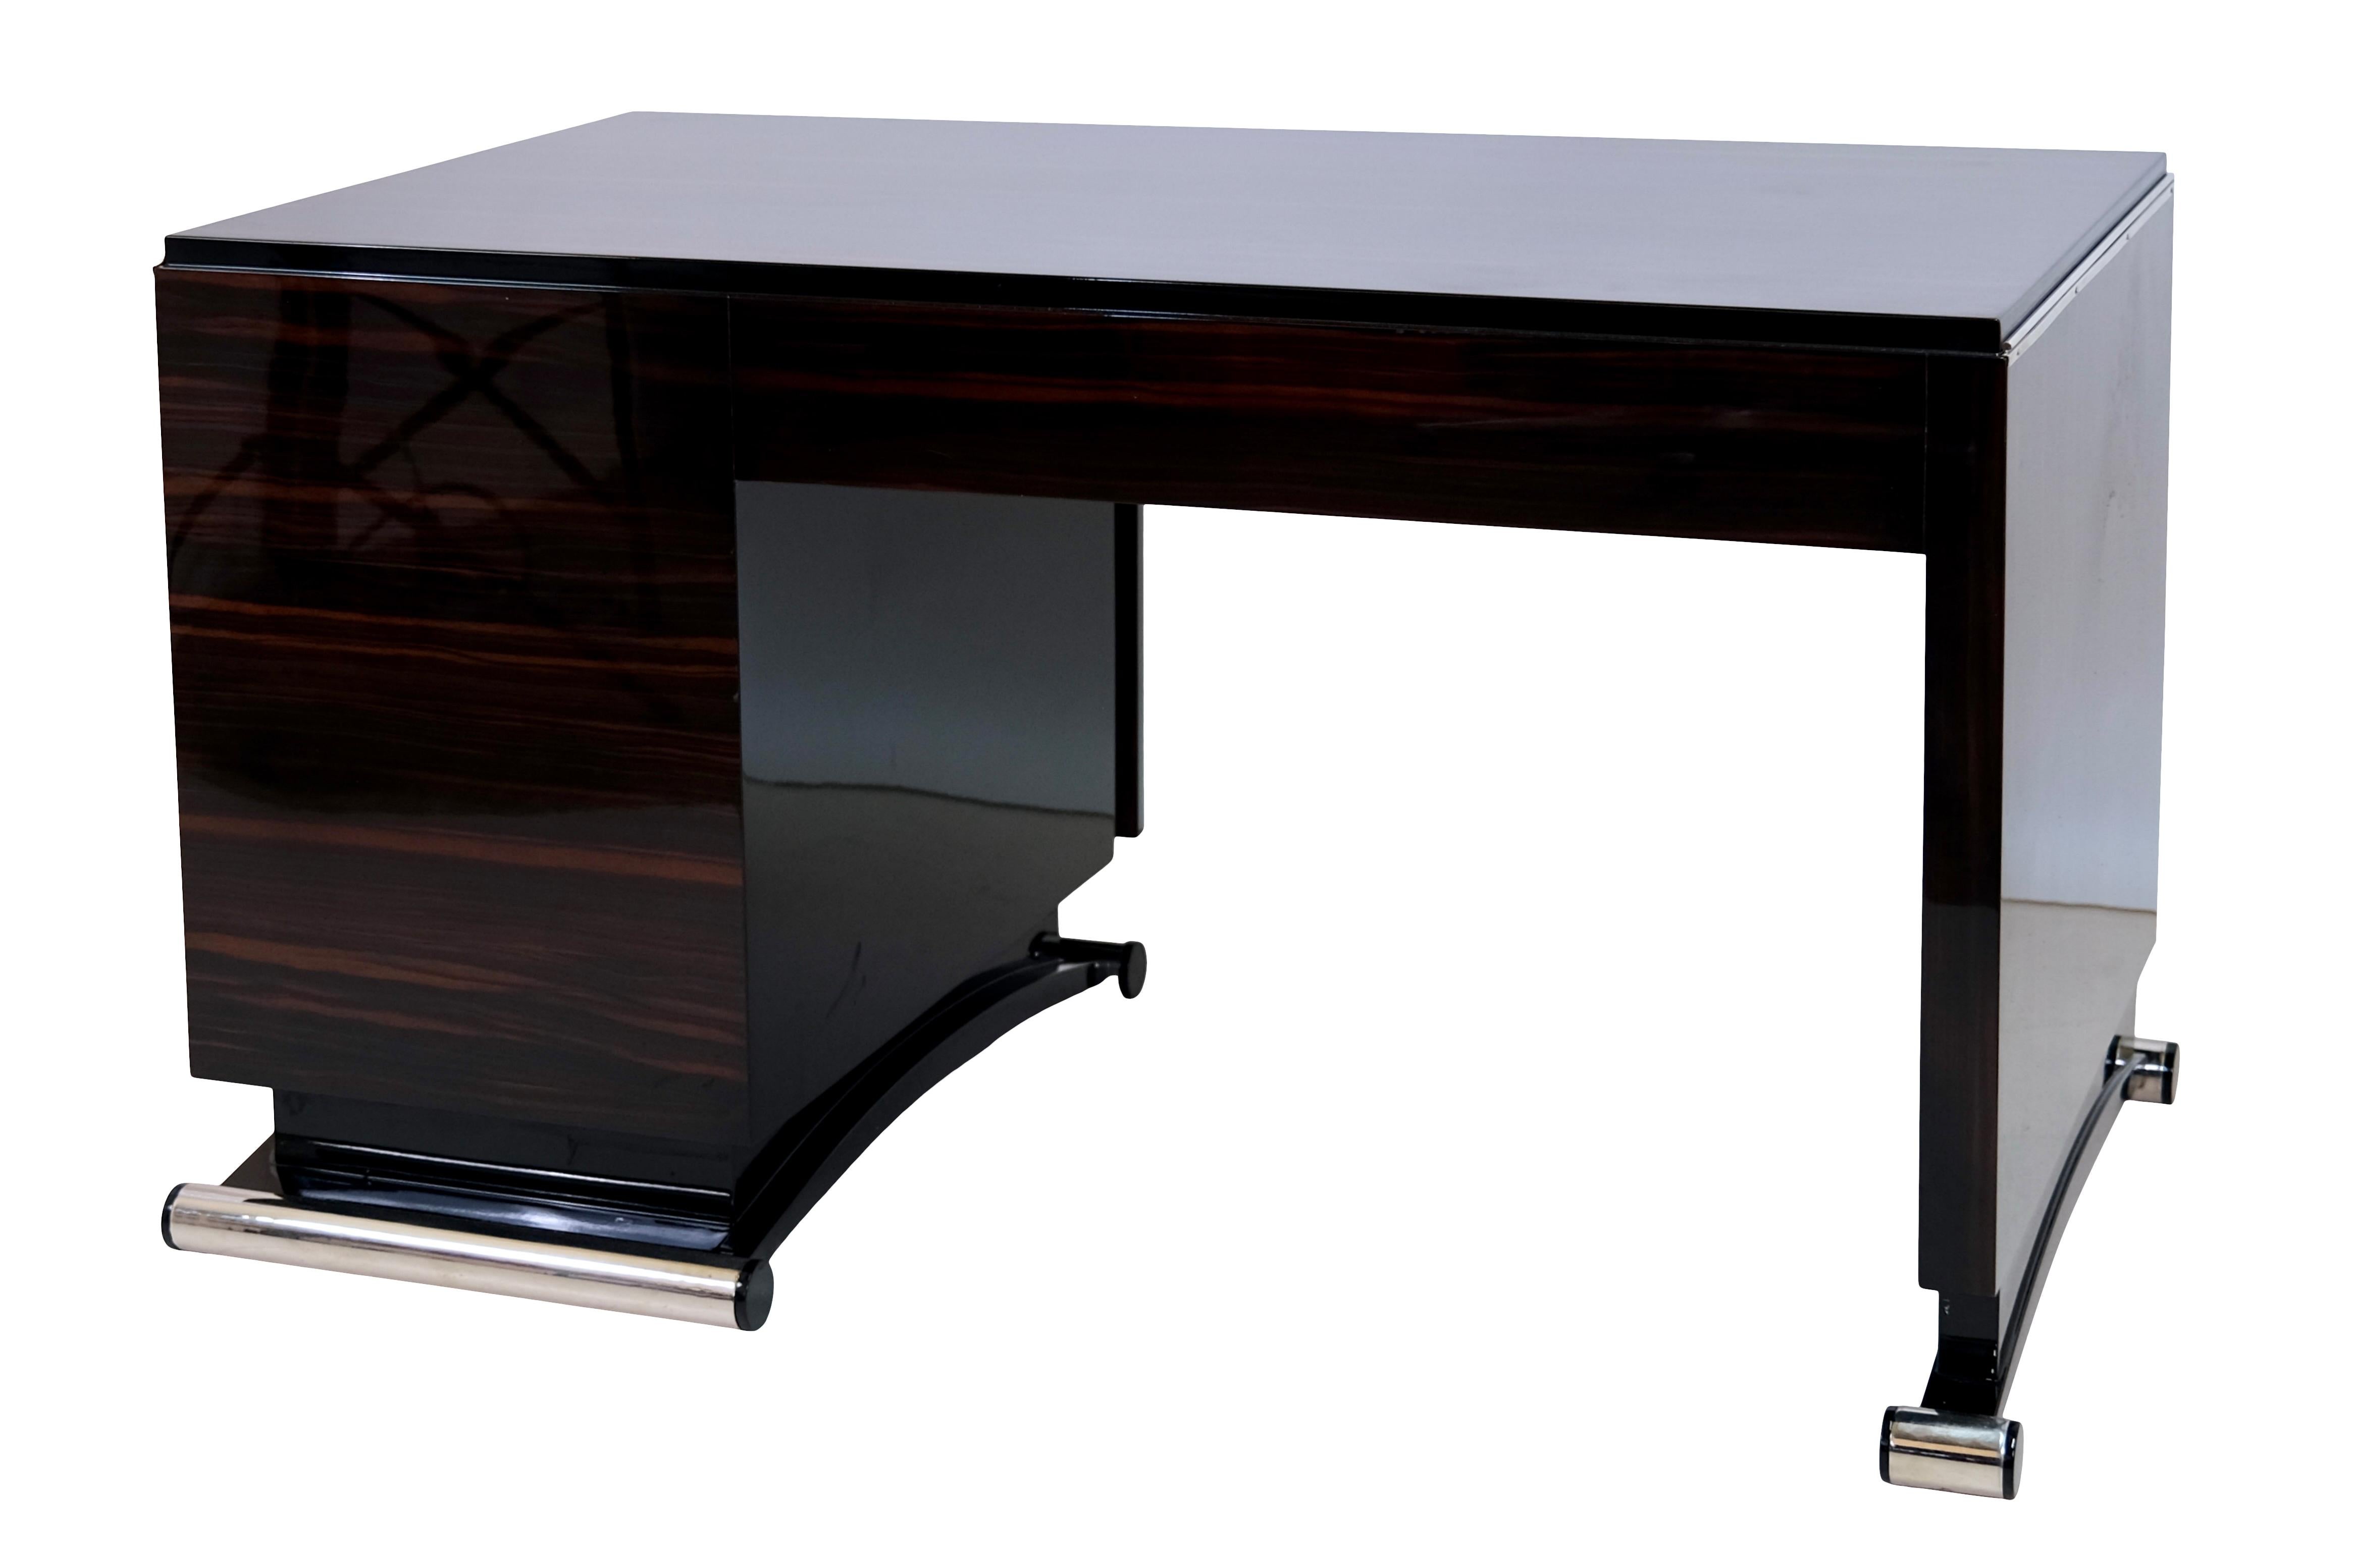 1930's French Art Deco Desk on Curved Legs in Makassar with High Gloss Finish  2